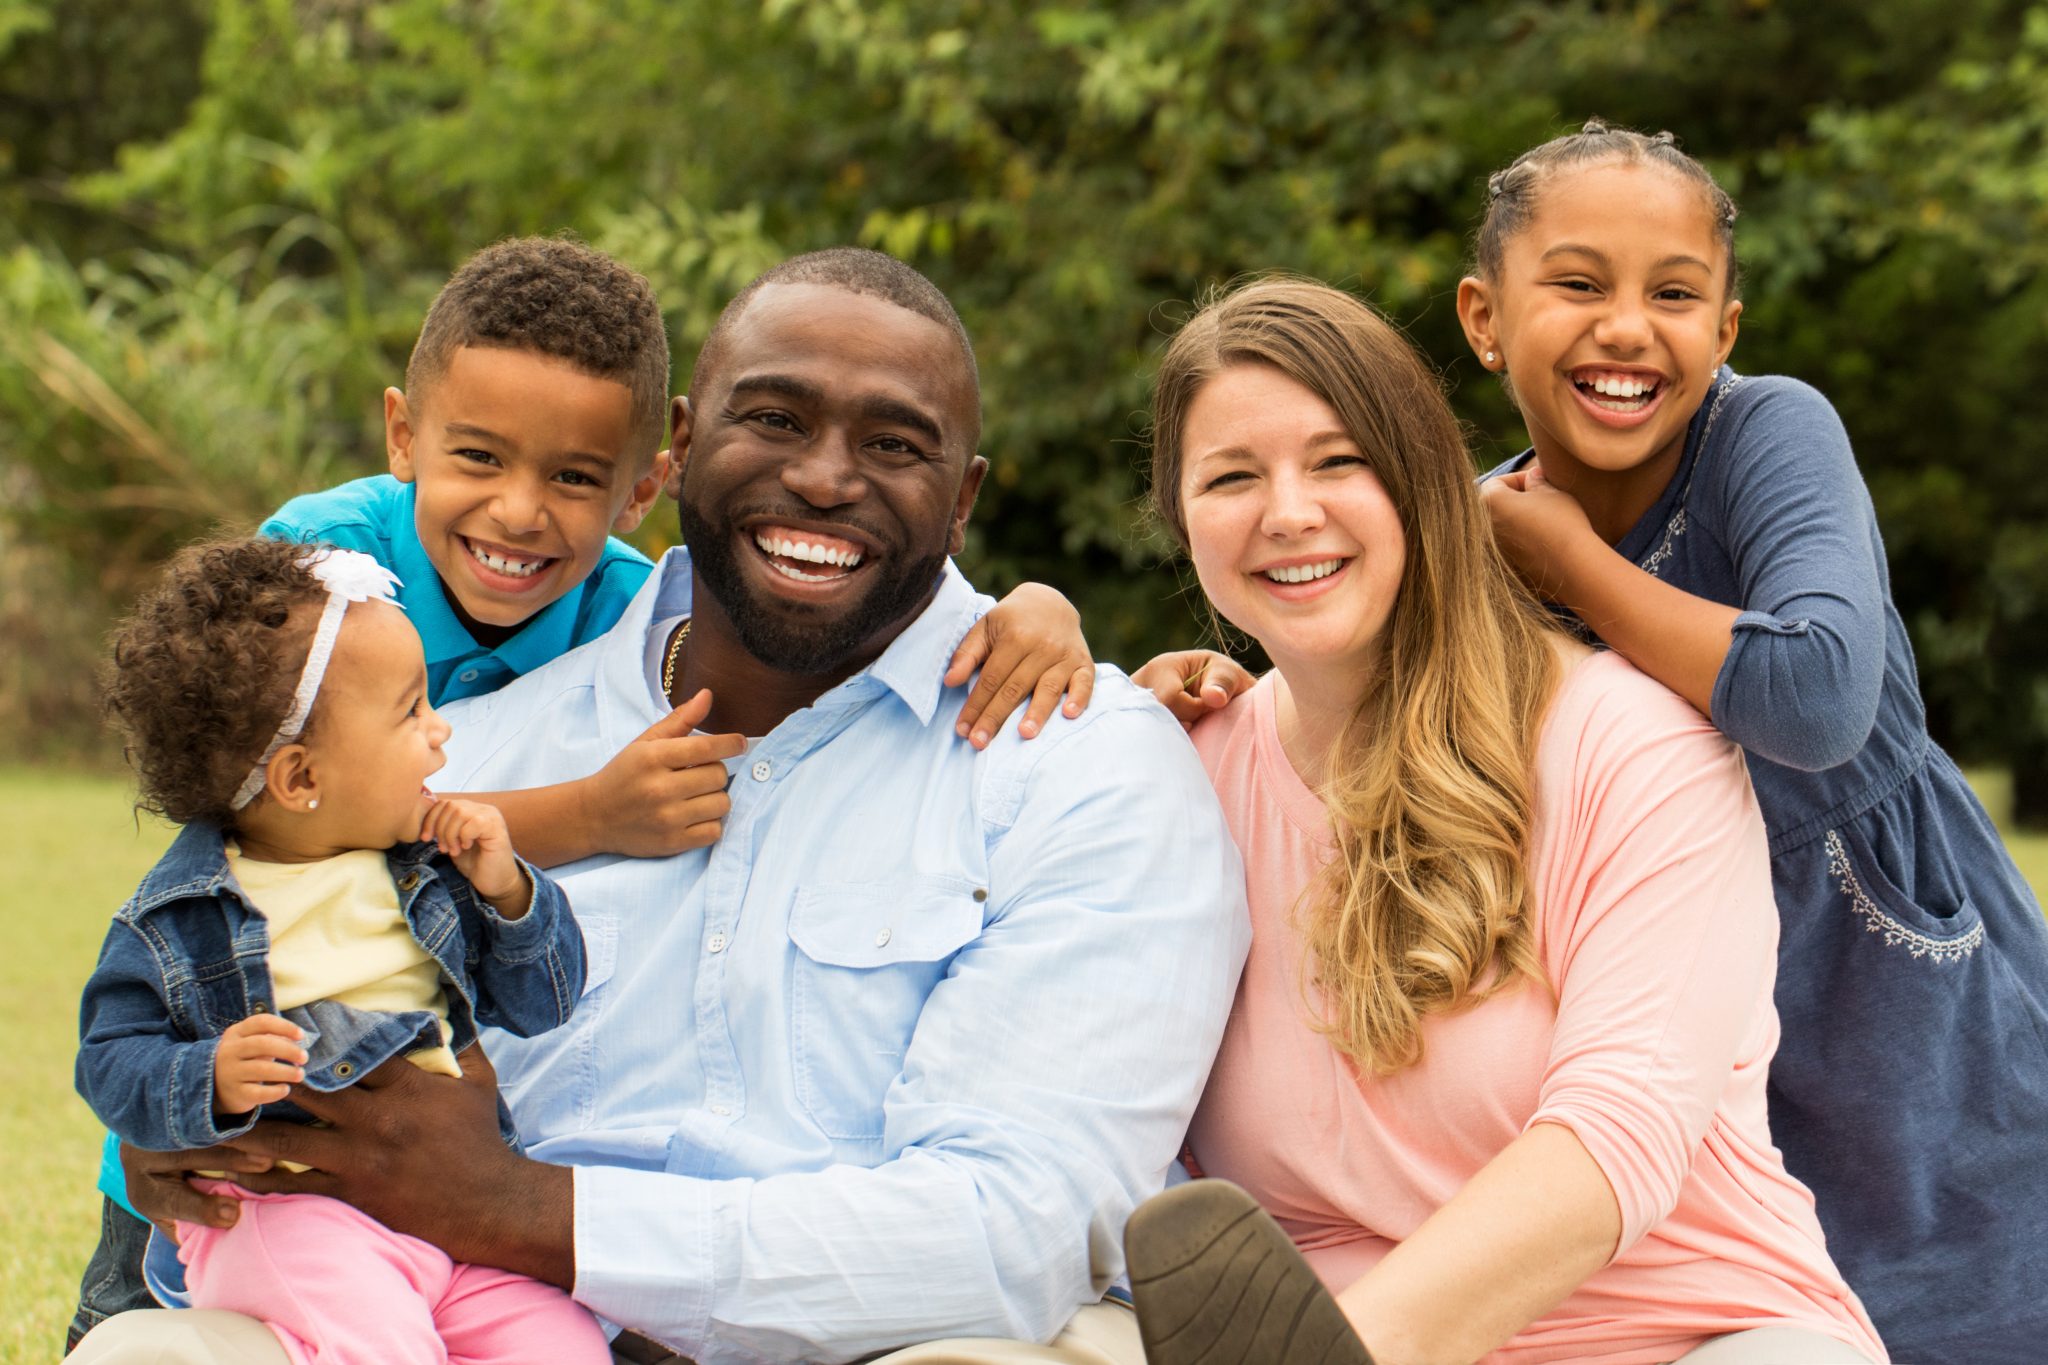 An interracial family smiling outdoors